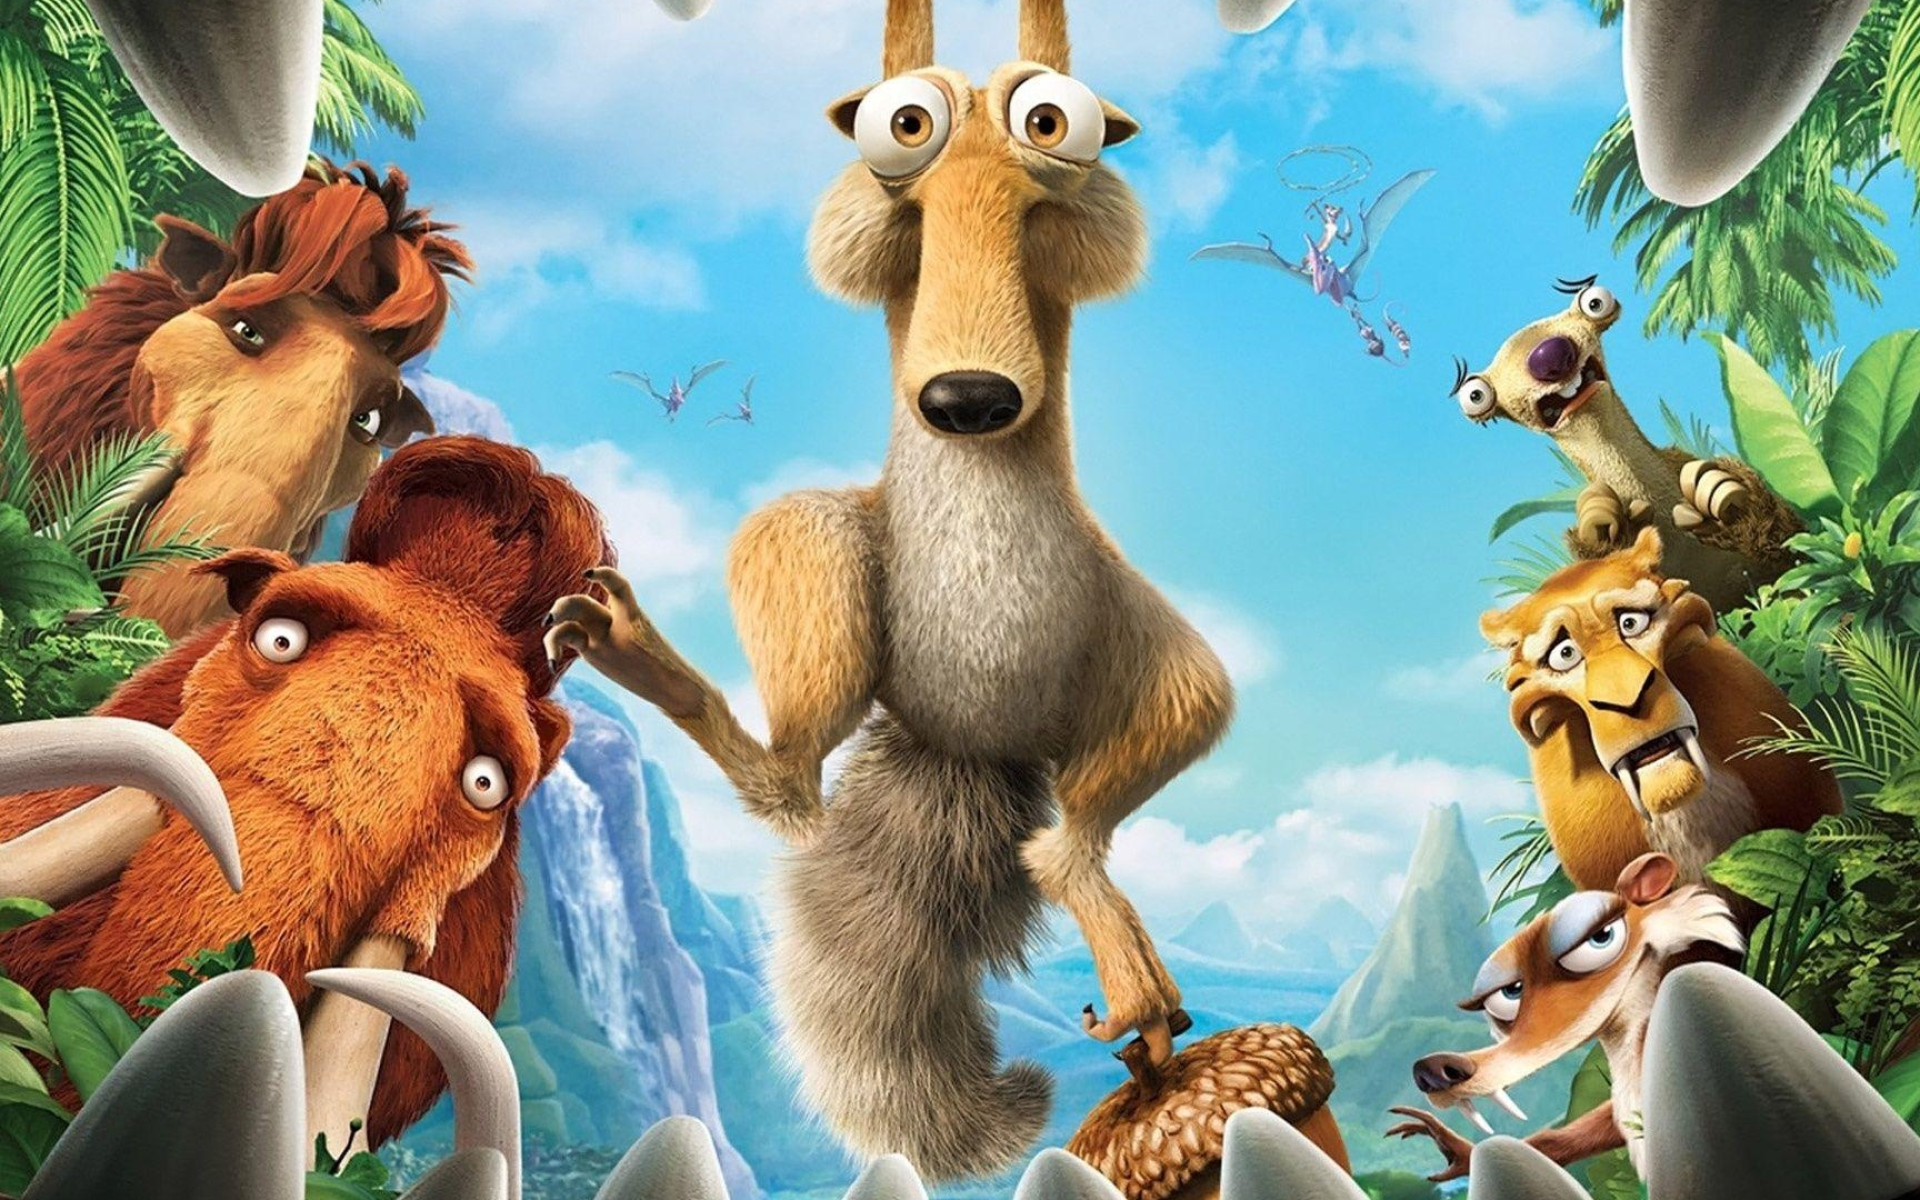 Ice Age movie wallpapers, Memorable characters, Animated movie backgrounds, collection, 1920x1200 HD Desktop